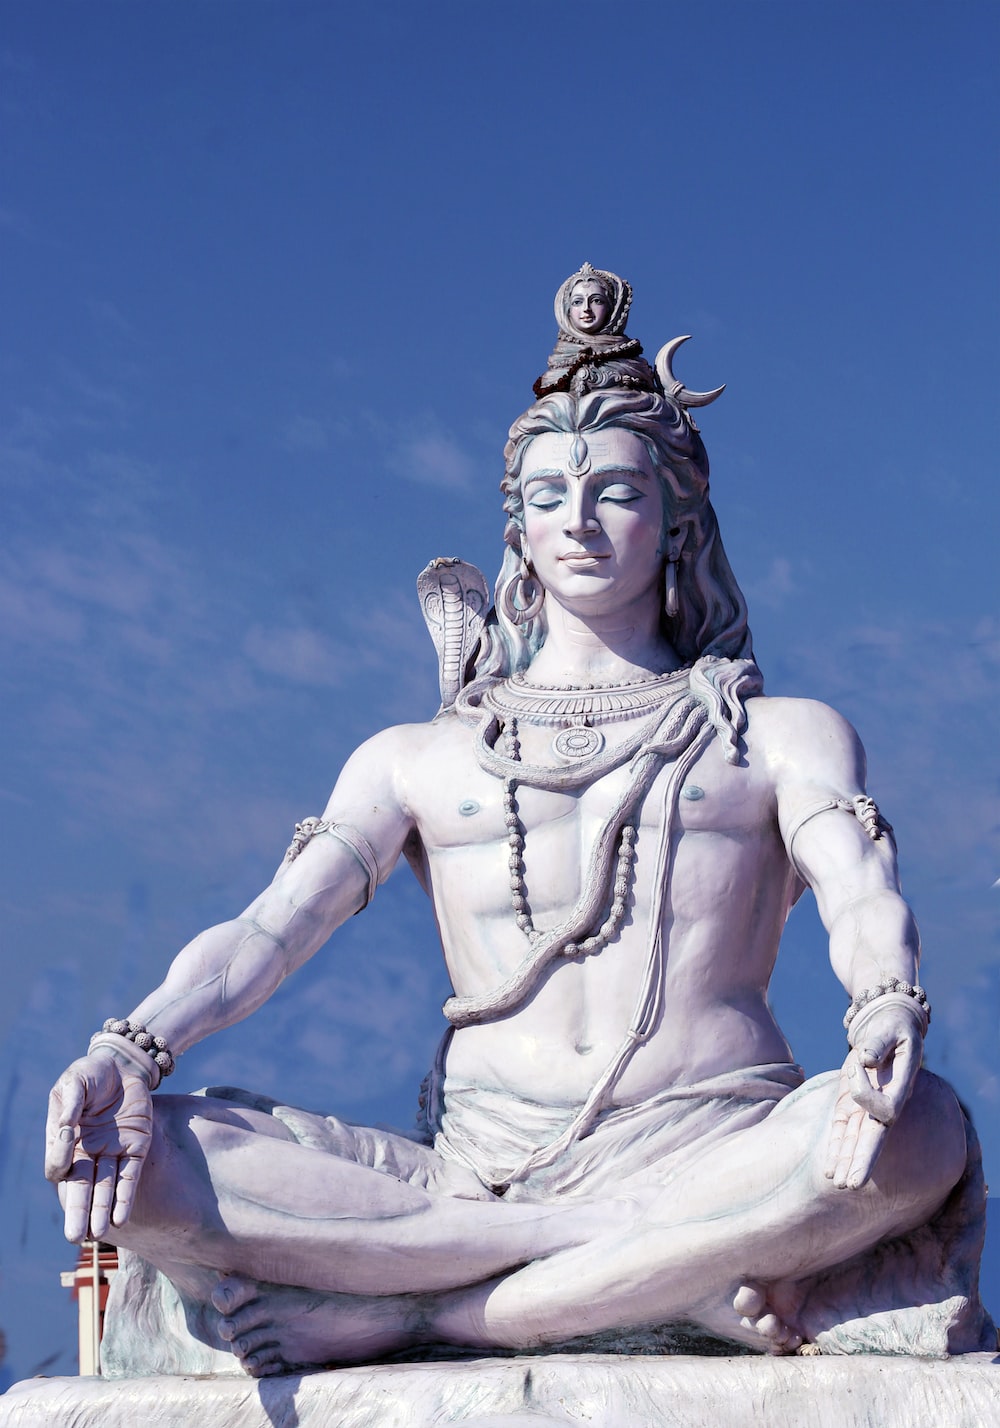 Shiva pictures hd download free images on